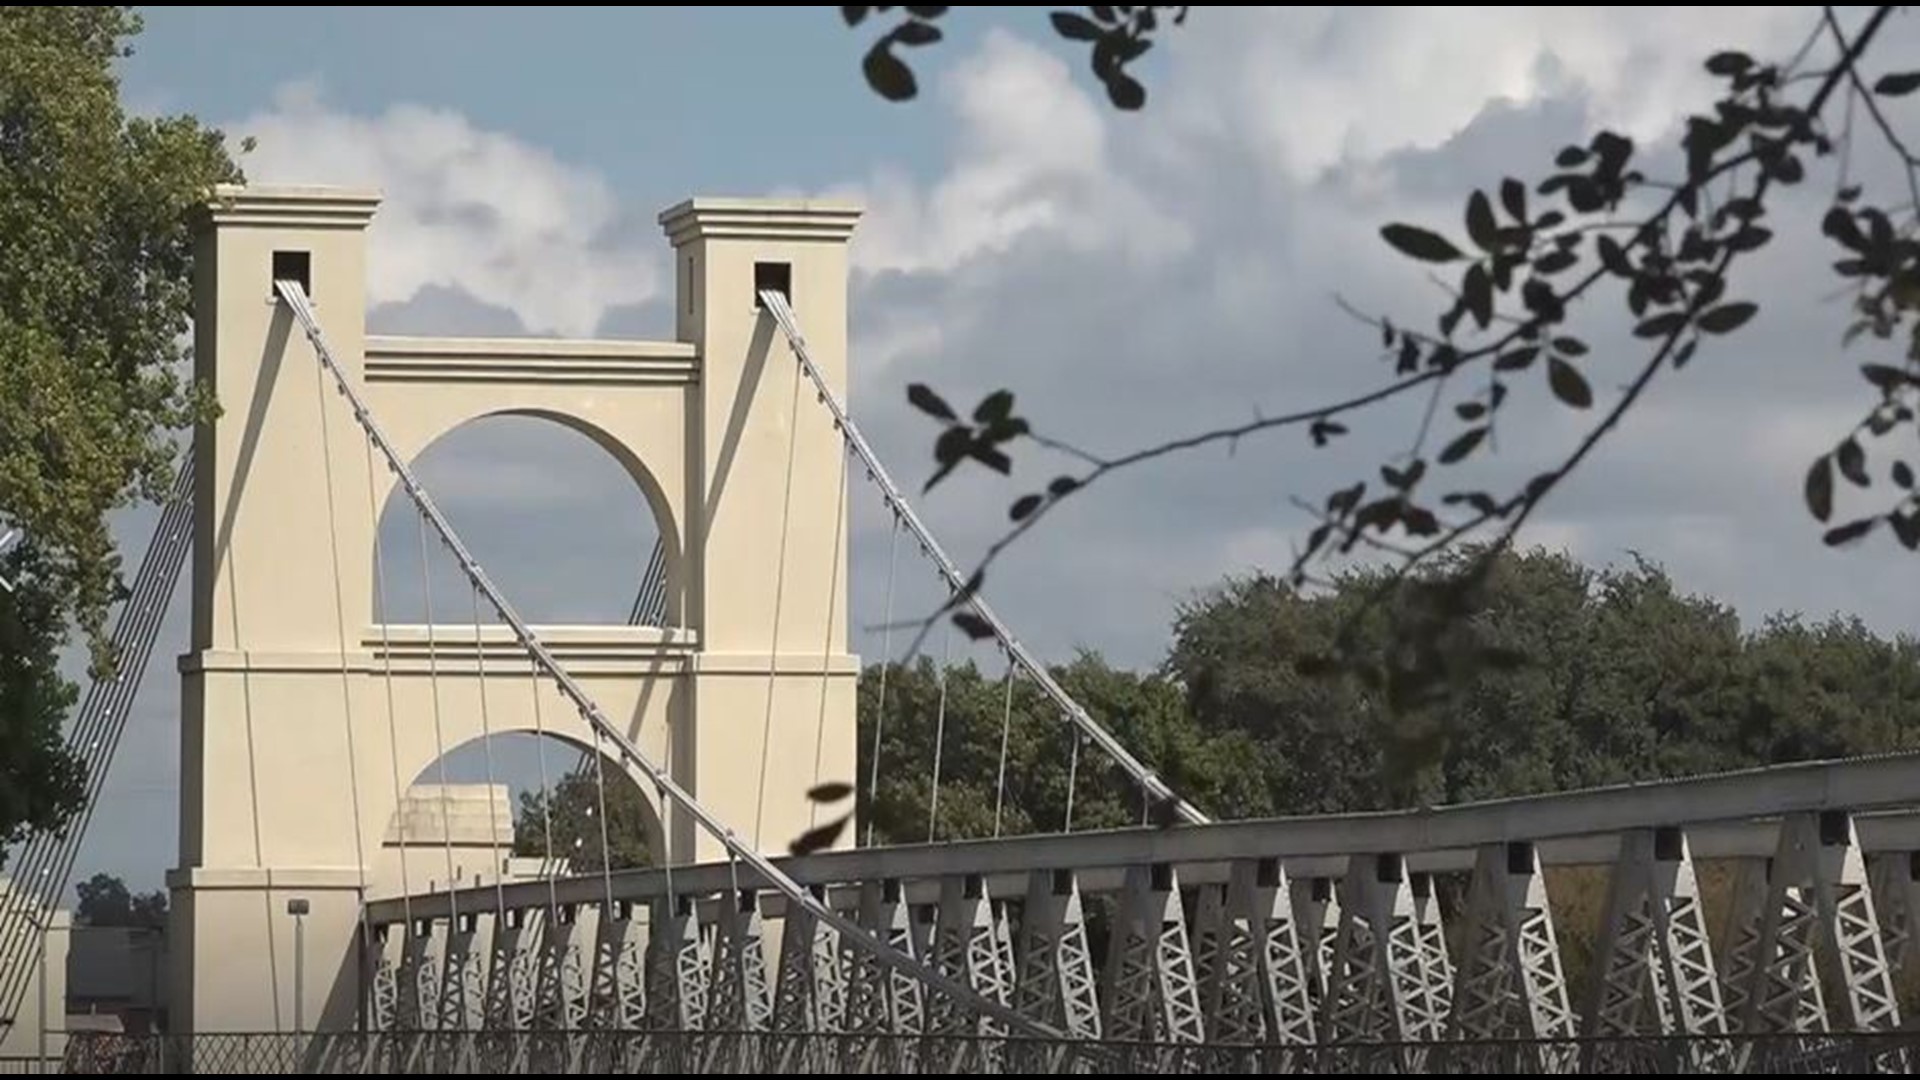 The 150-year-old bridge will undergo major, $12.4M renovations to preserve the landmark over the next 18-24 months, during which it will remain closed.